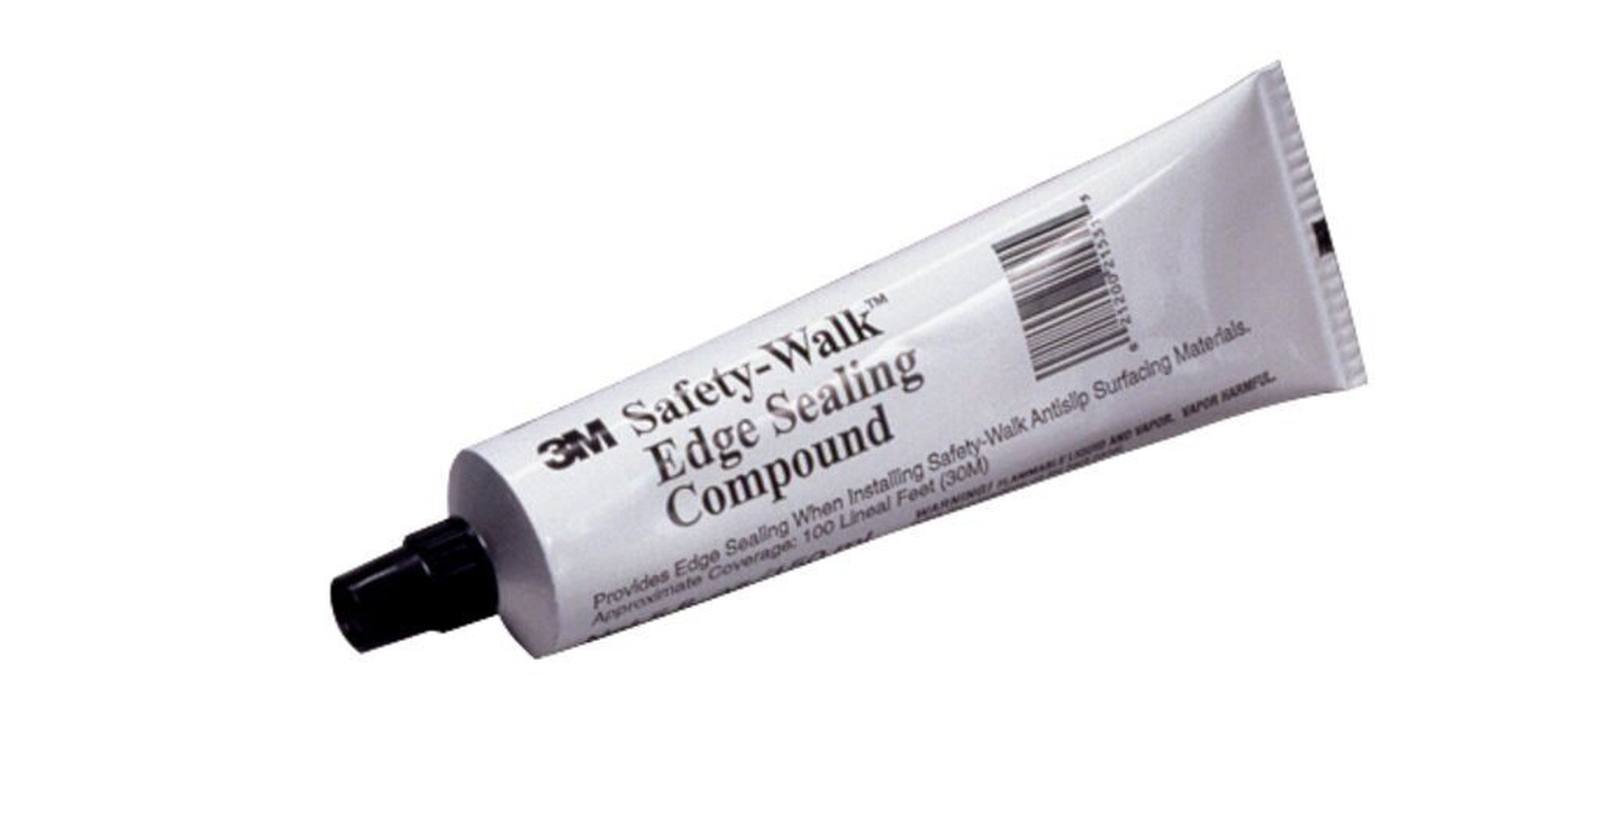 3M Safety-Walk edge protection 150ml for approx. 40m edge length (Edge Sealing Compound)